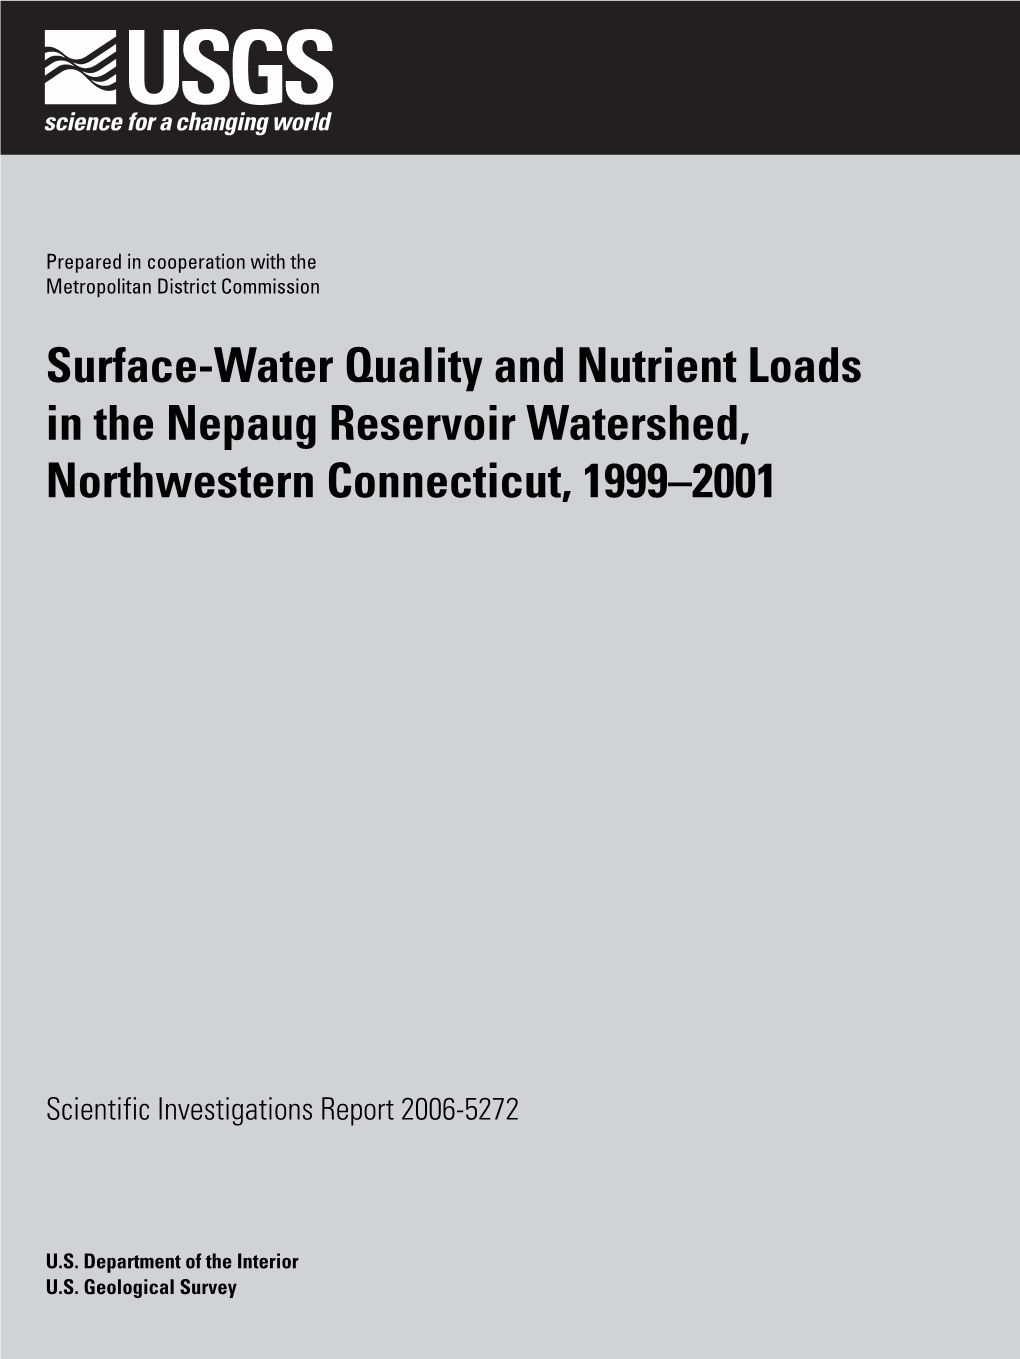 Surface-Water Quality and Nutrient Loads in the Nepaug Reservoir